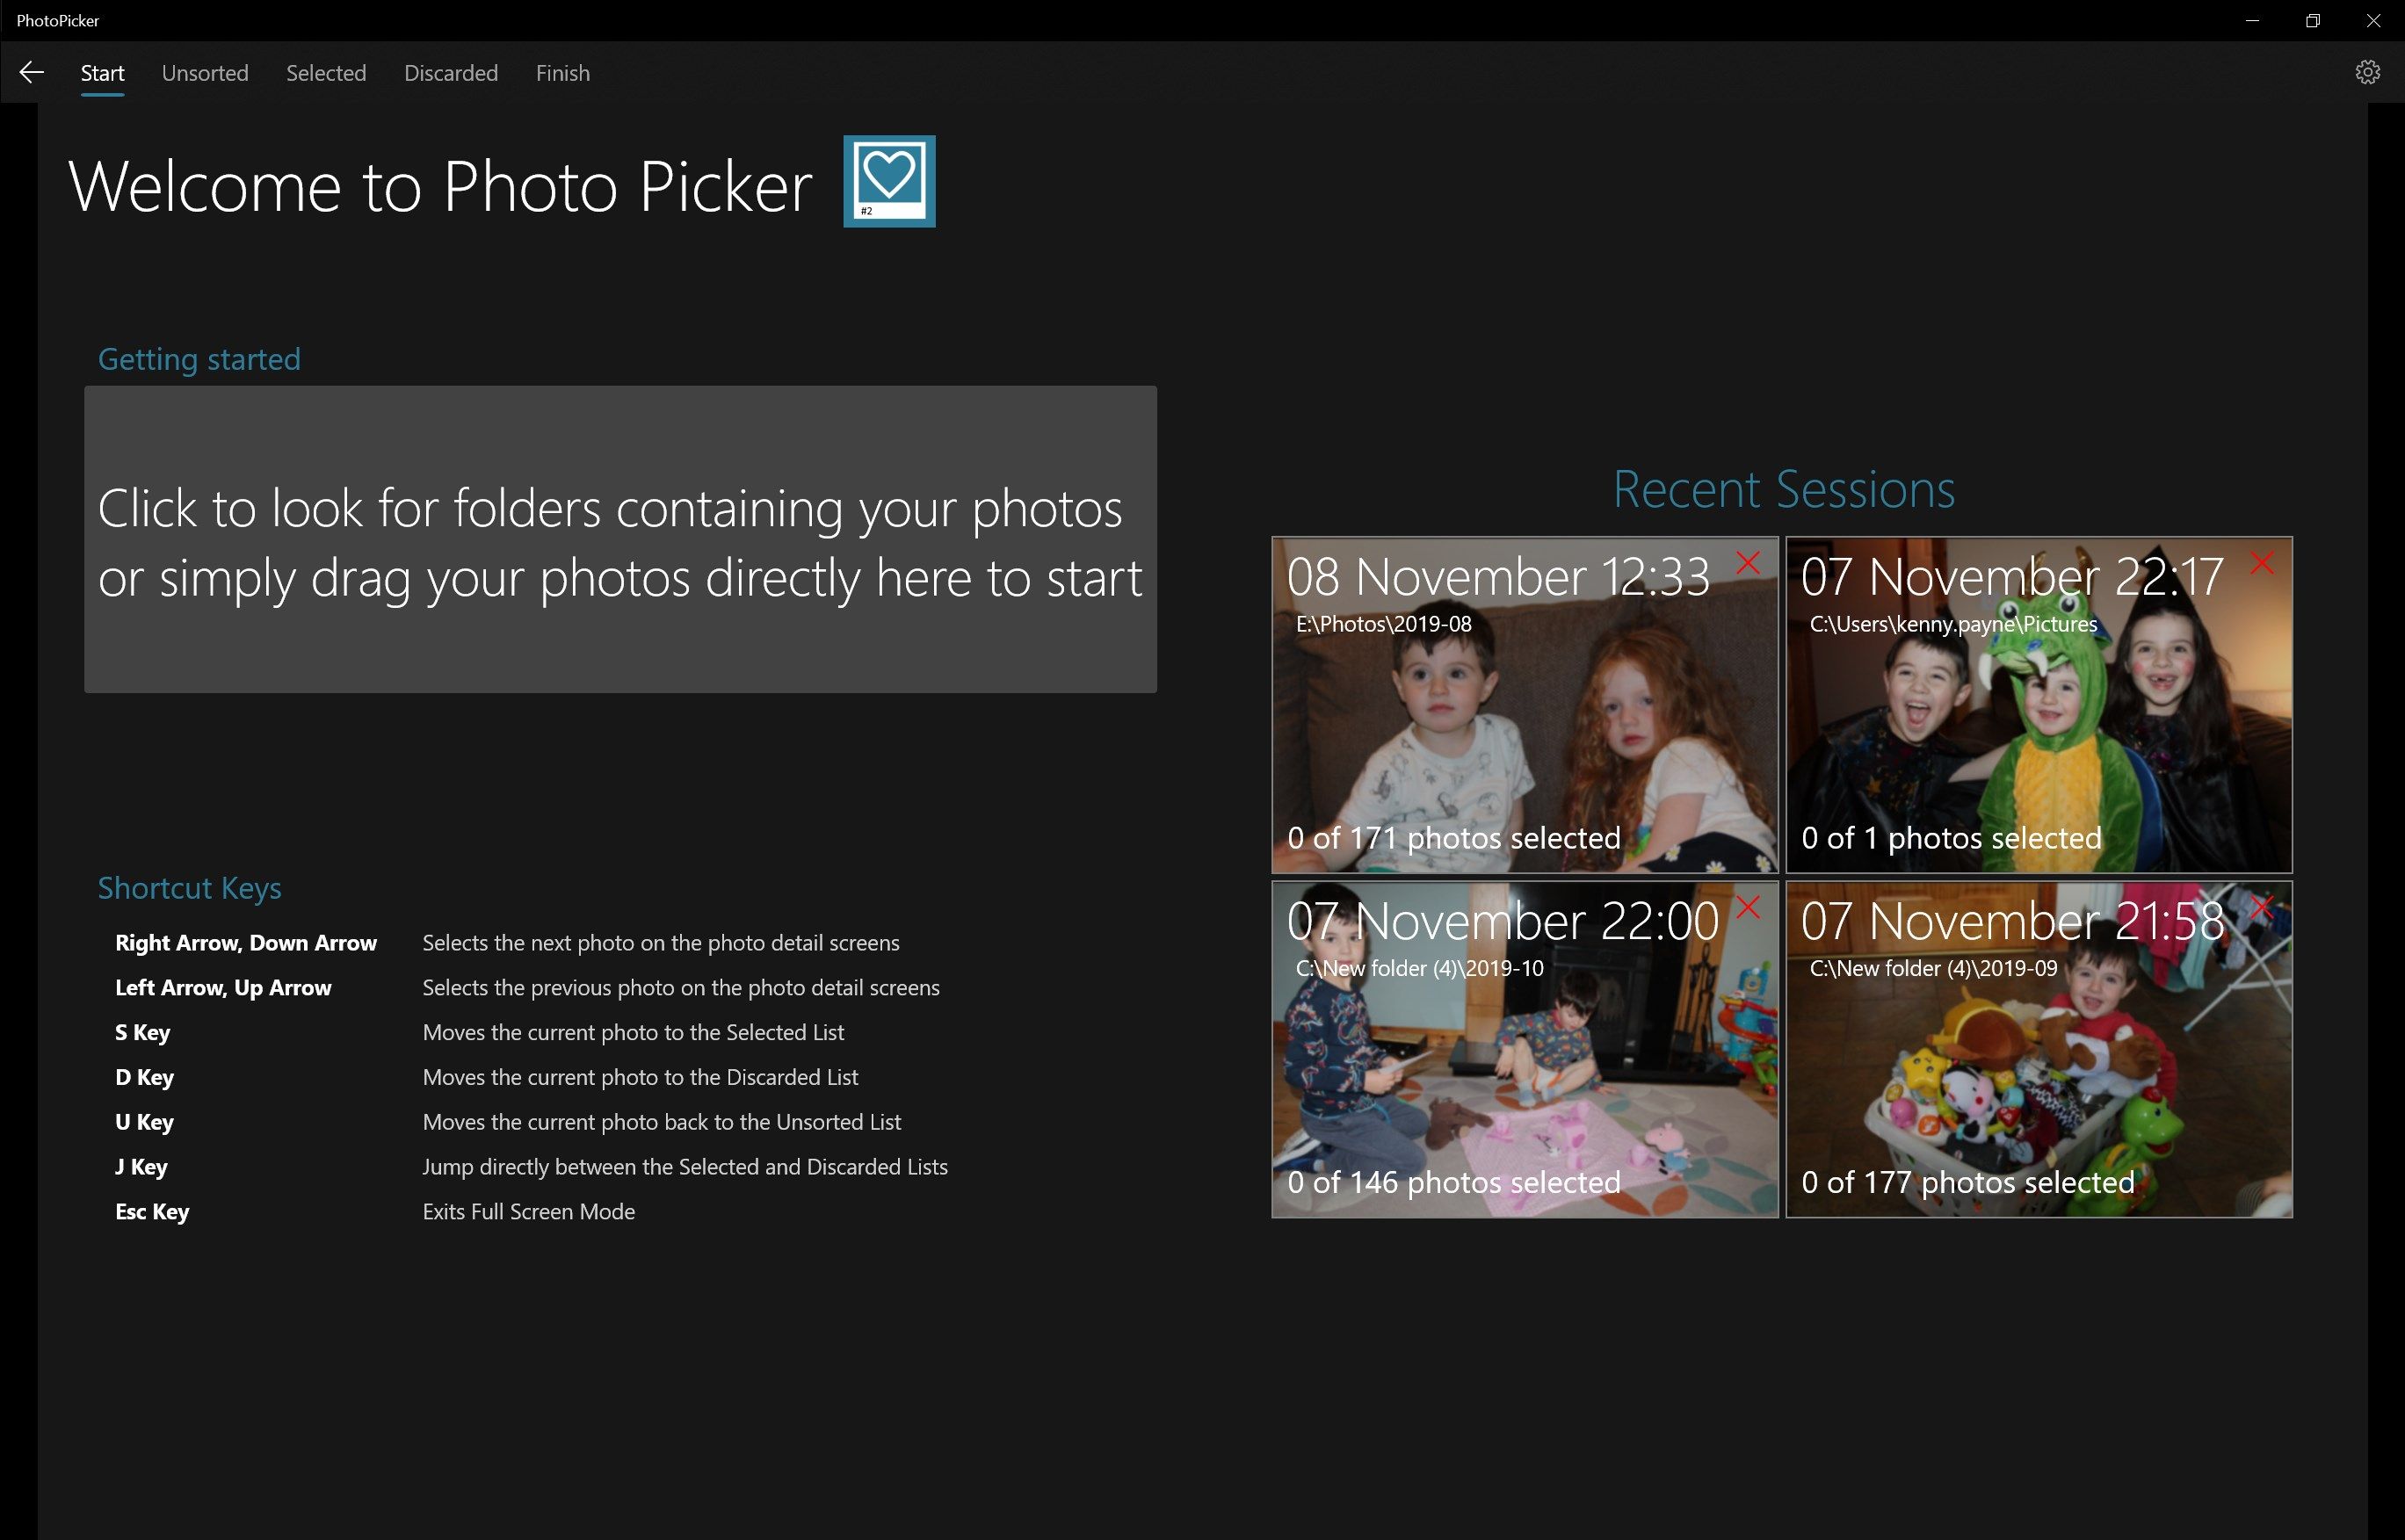 Start screen: Select your photo folder, drag photos onto the app or resume from a previous session